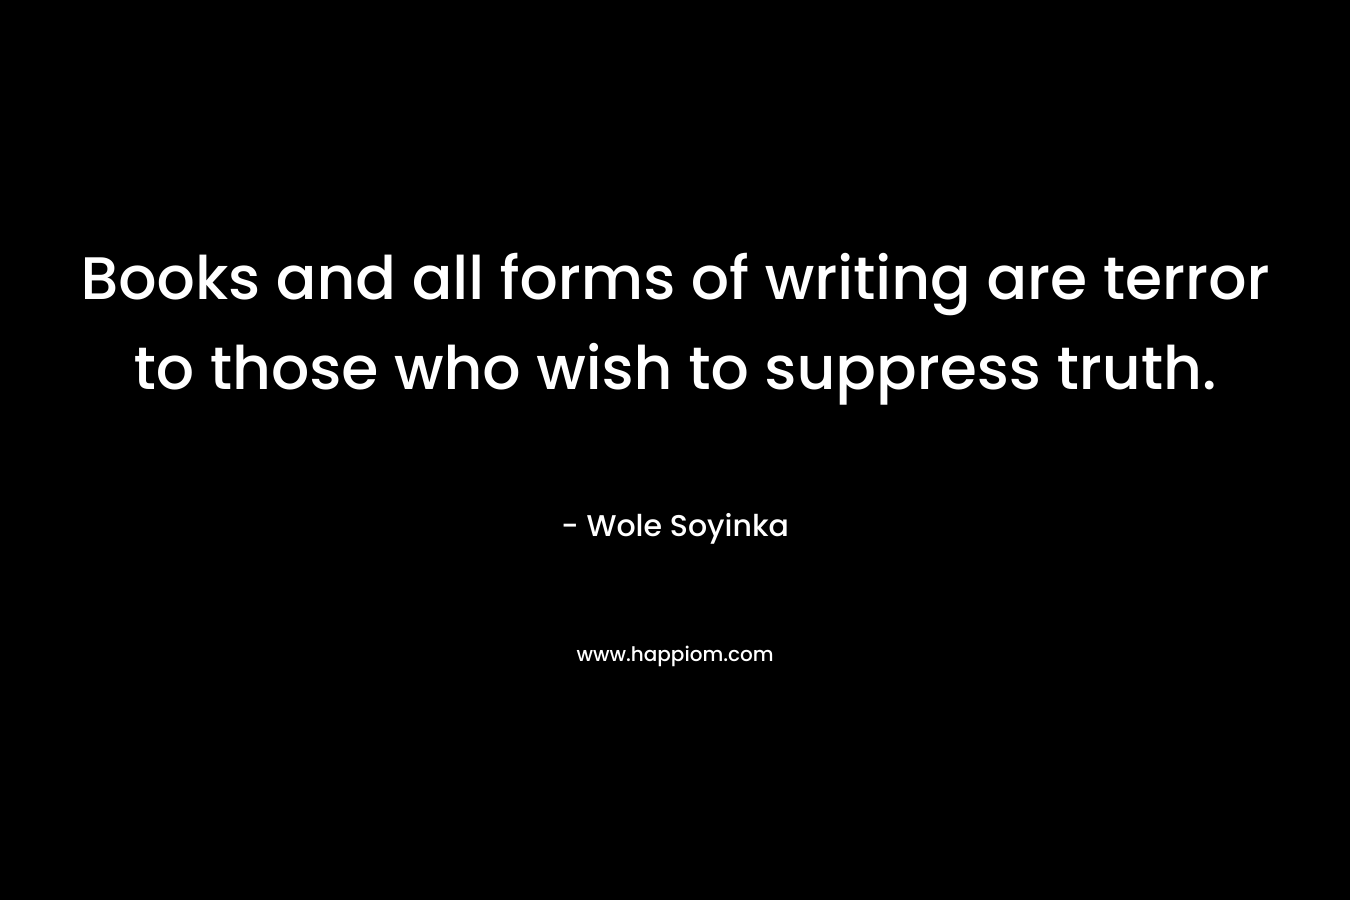 Books and all forms of writing are terror to those who wish to suppress truth. – Wole Soyinka